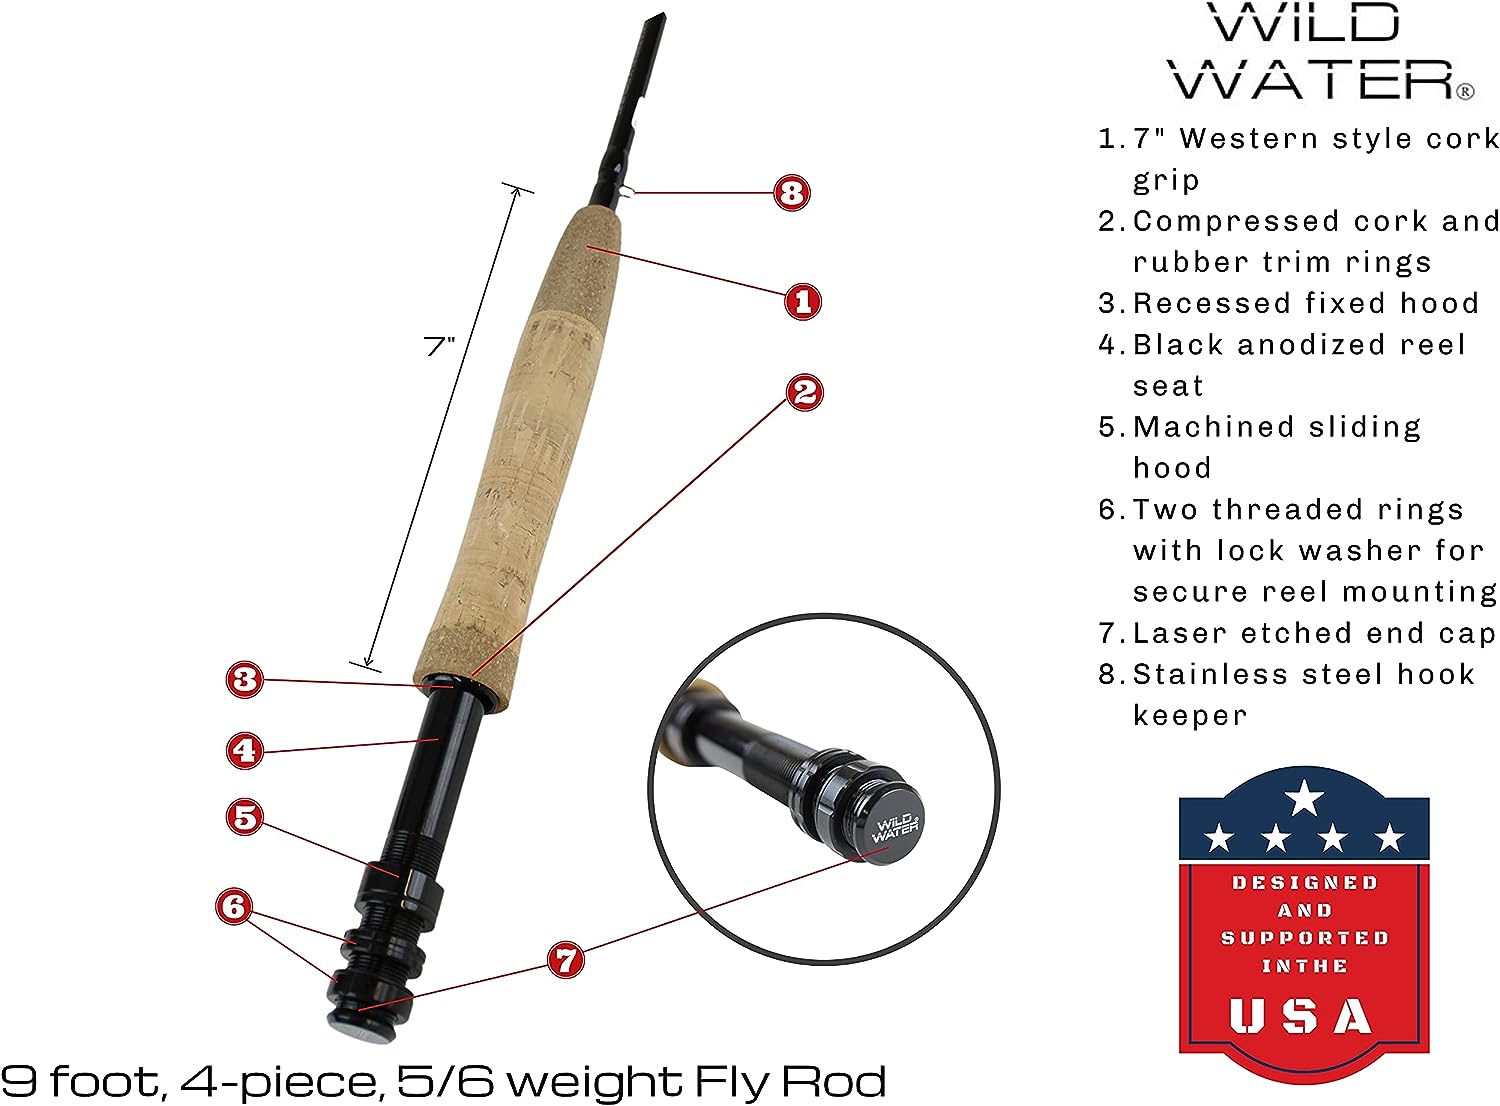 Wild Standard Fly Fishing Combo Starter Kit, 5 or 6 Weight 9 Foot Fly Rod,  4-Piece Graphite Rod with Cork Handle, Accessories, Die Cast Aluminum Reel